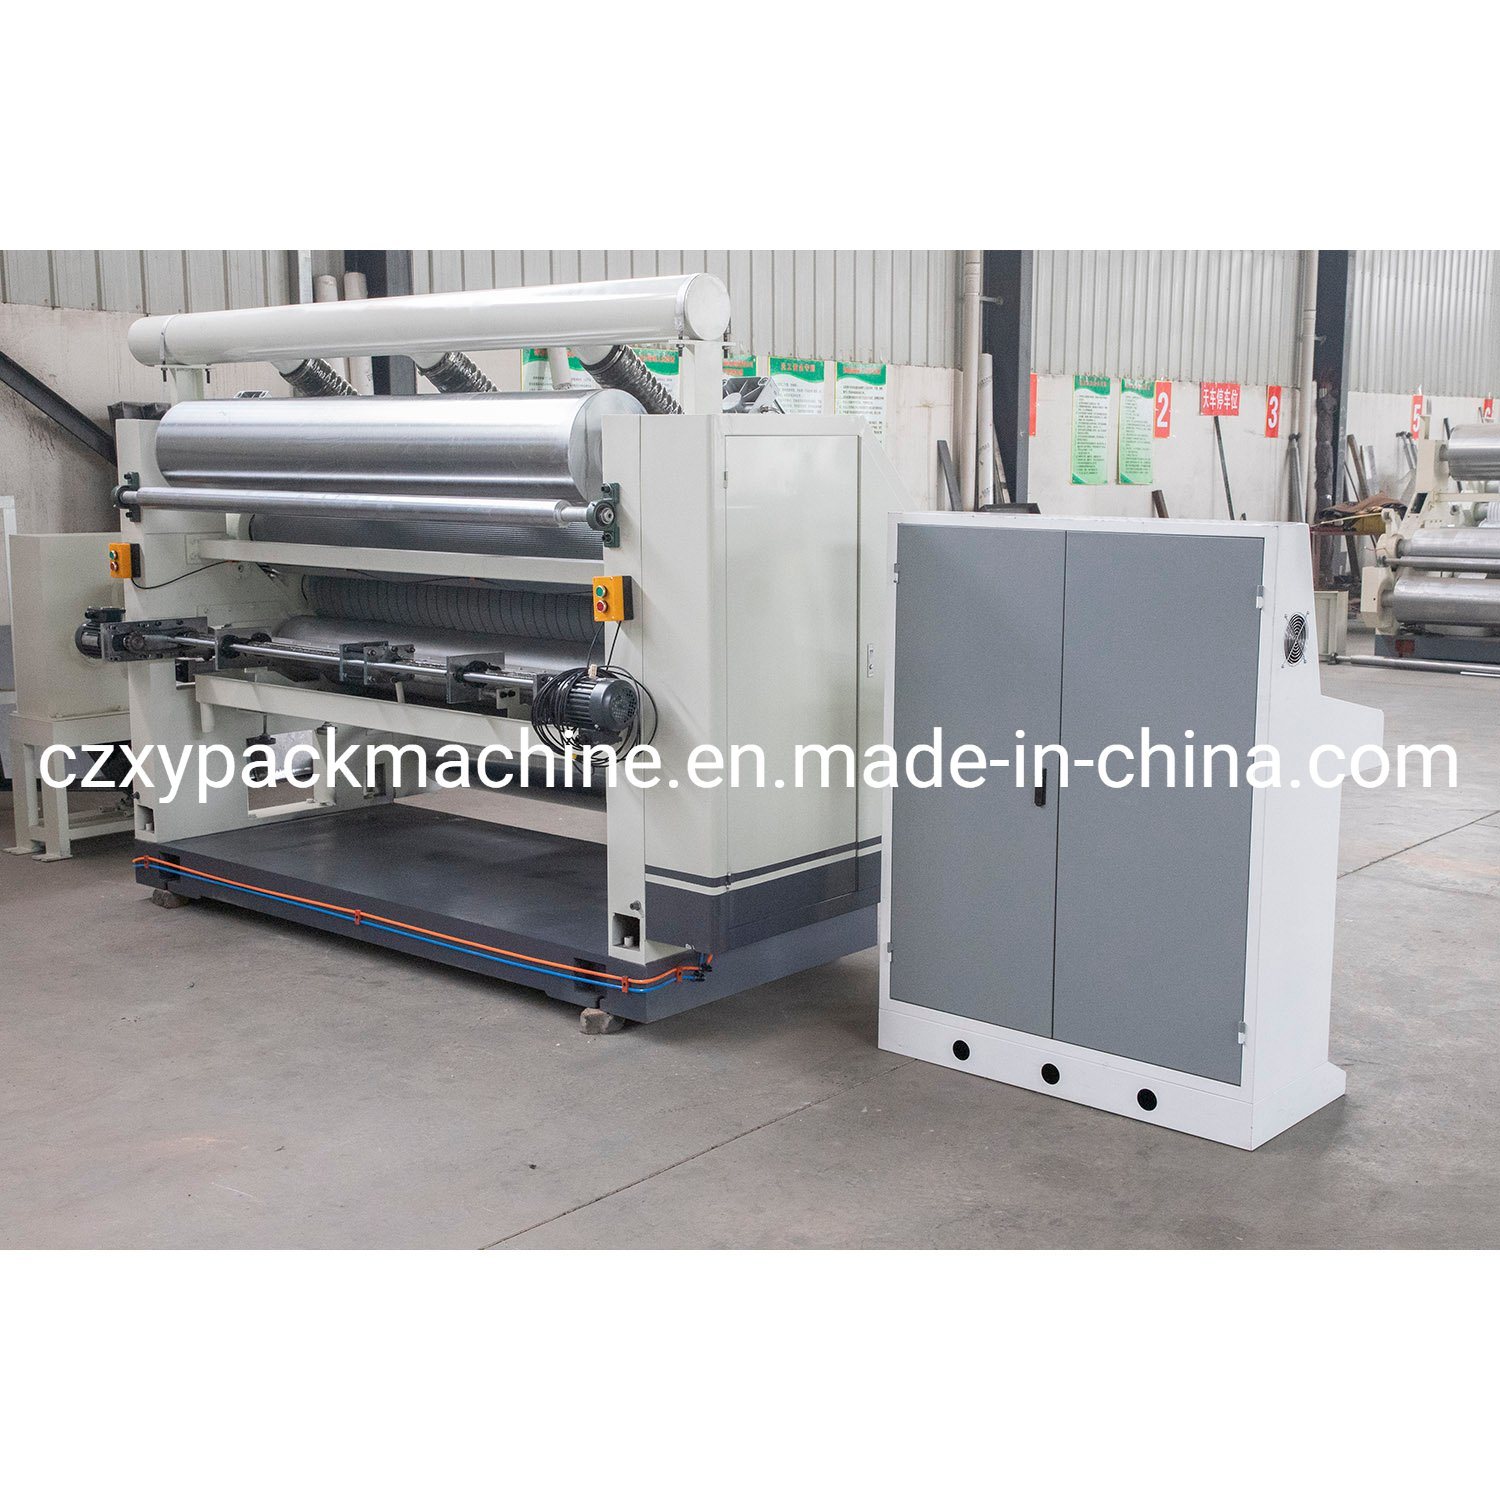 Single Facer Corrugated Line Carton Box Making Machine with Great Price with High Quality